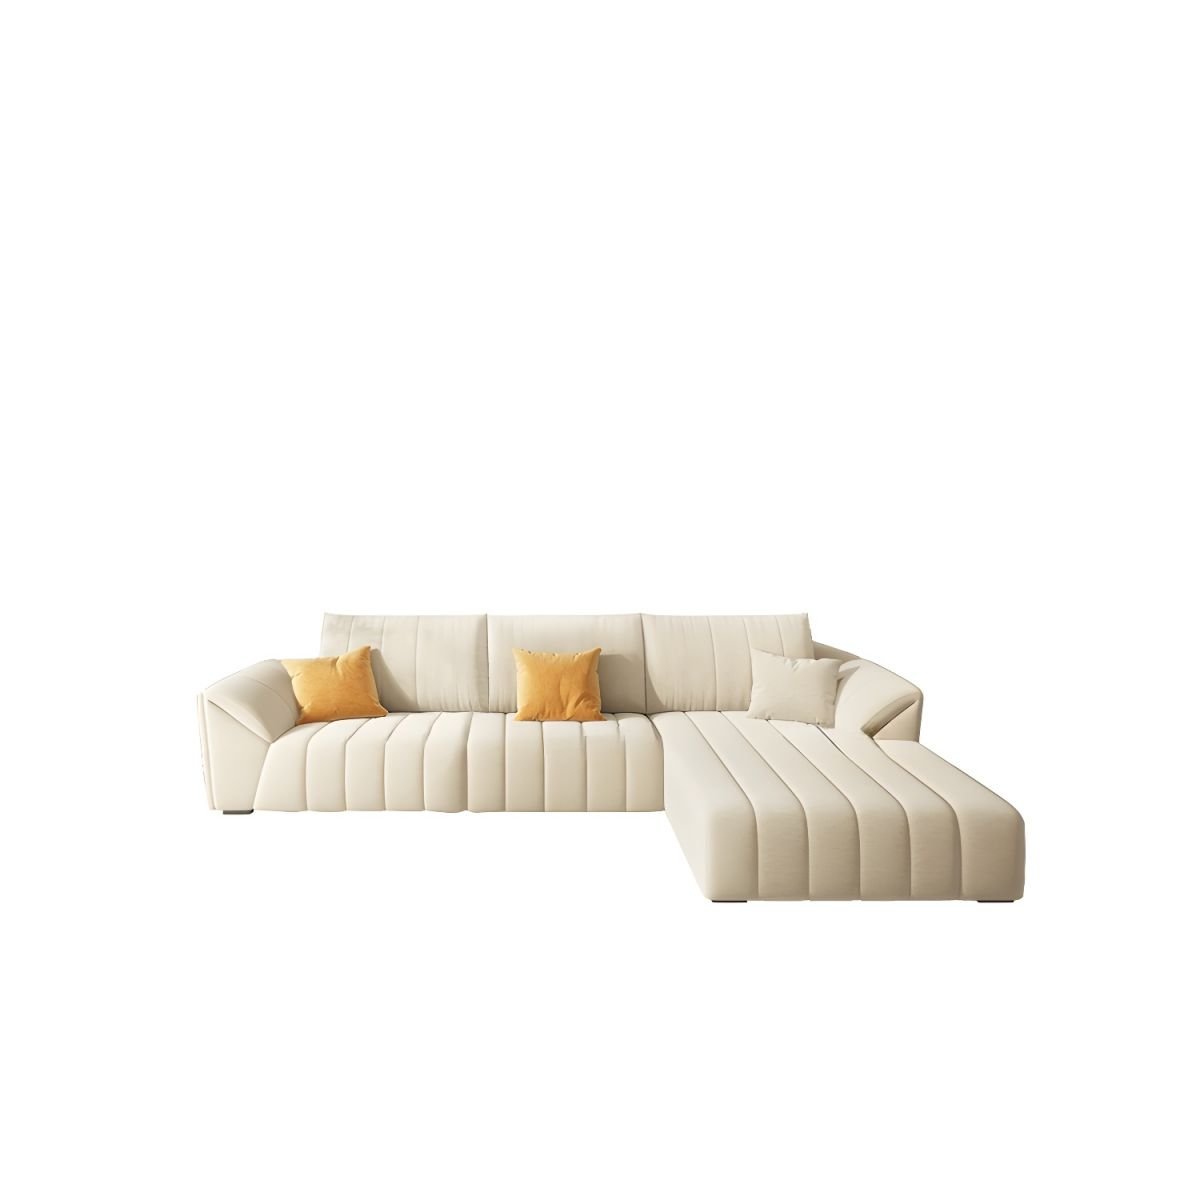 Contemporary Off-White L-Shaped Sofa & Chaise with Bolster Pillows - 115"L x 71"W x 37"H Milk Fleece Right